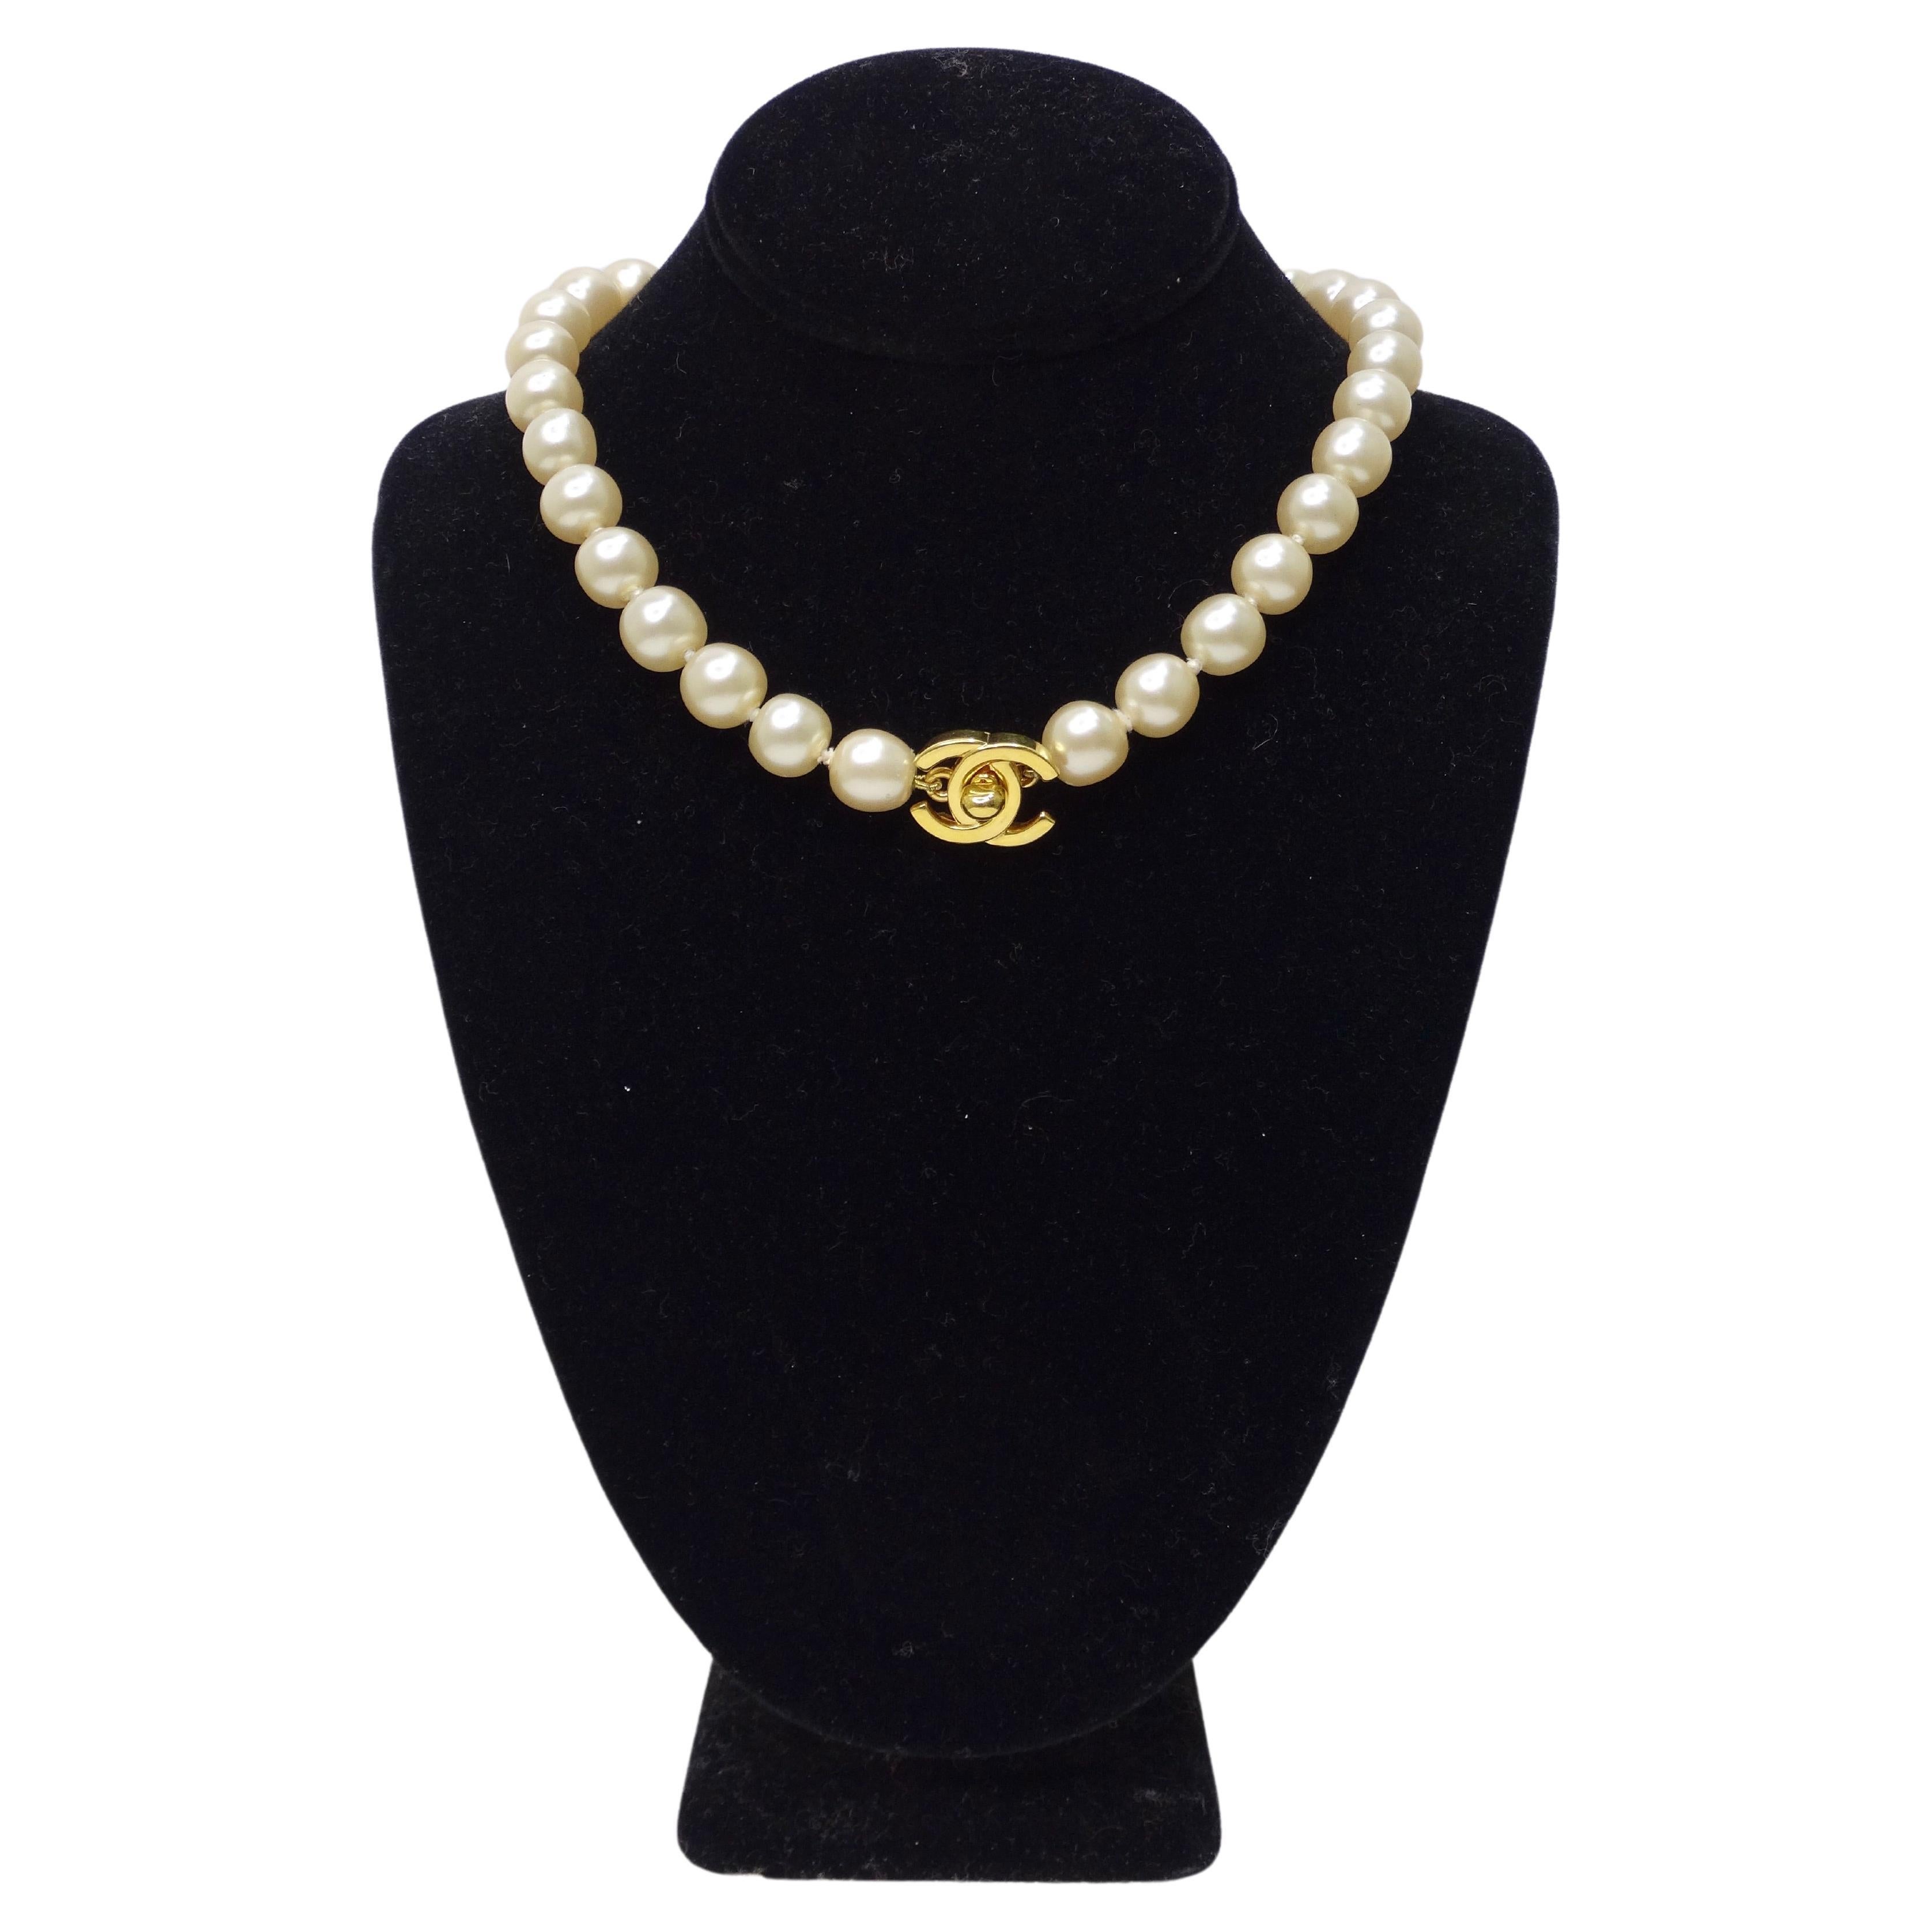 chanel necklace choker pearls